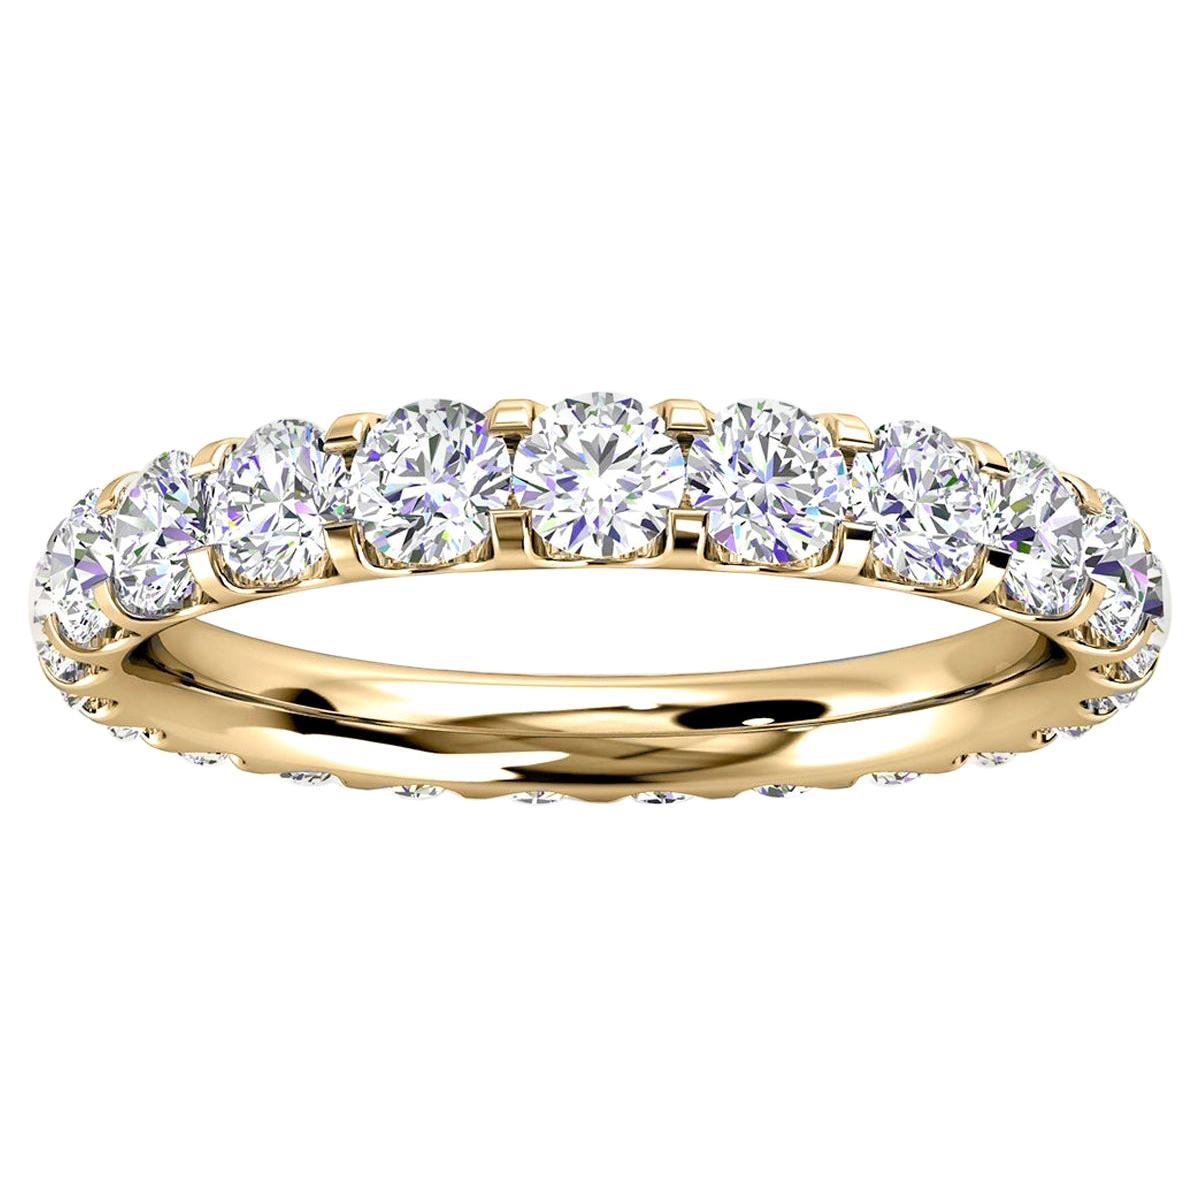 For Sale:  18k Yellow Gold Viola Eternity Micro-Prong Diamond Ring '1 1/2 Ct. Tw'